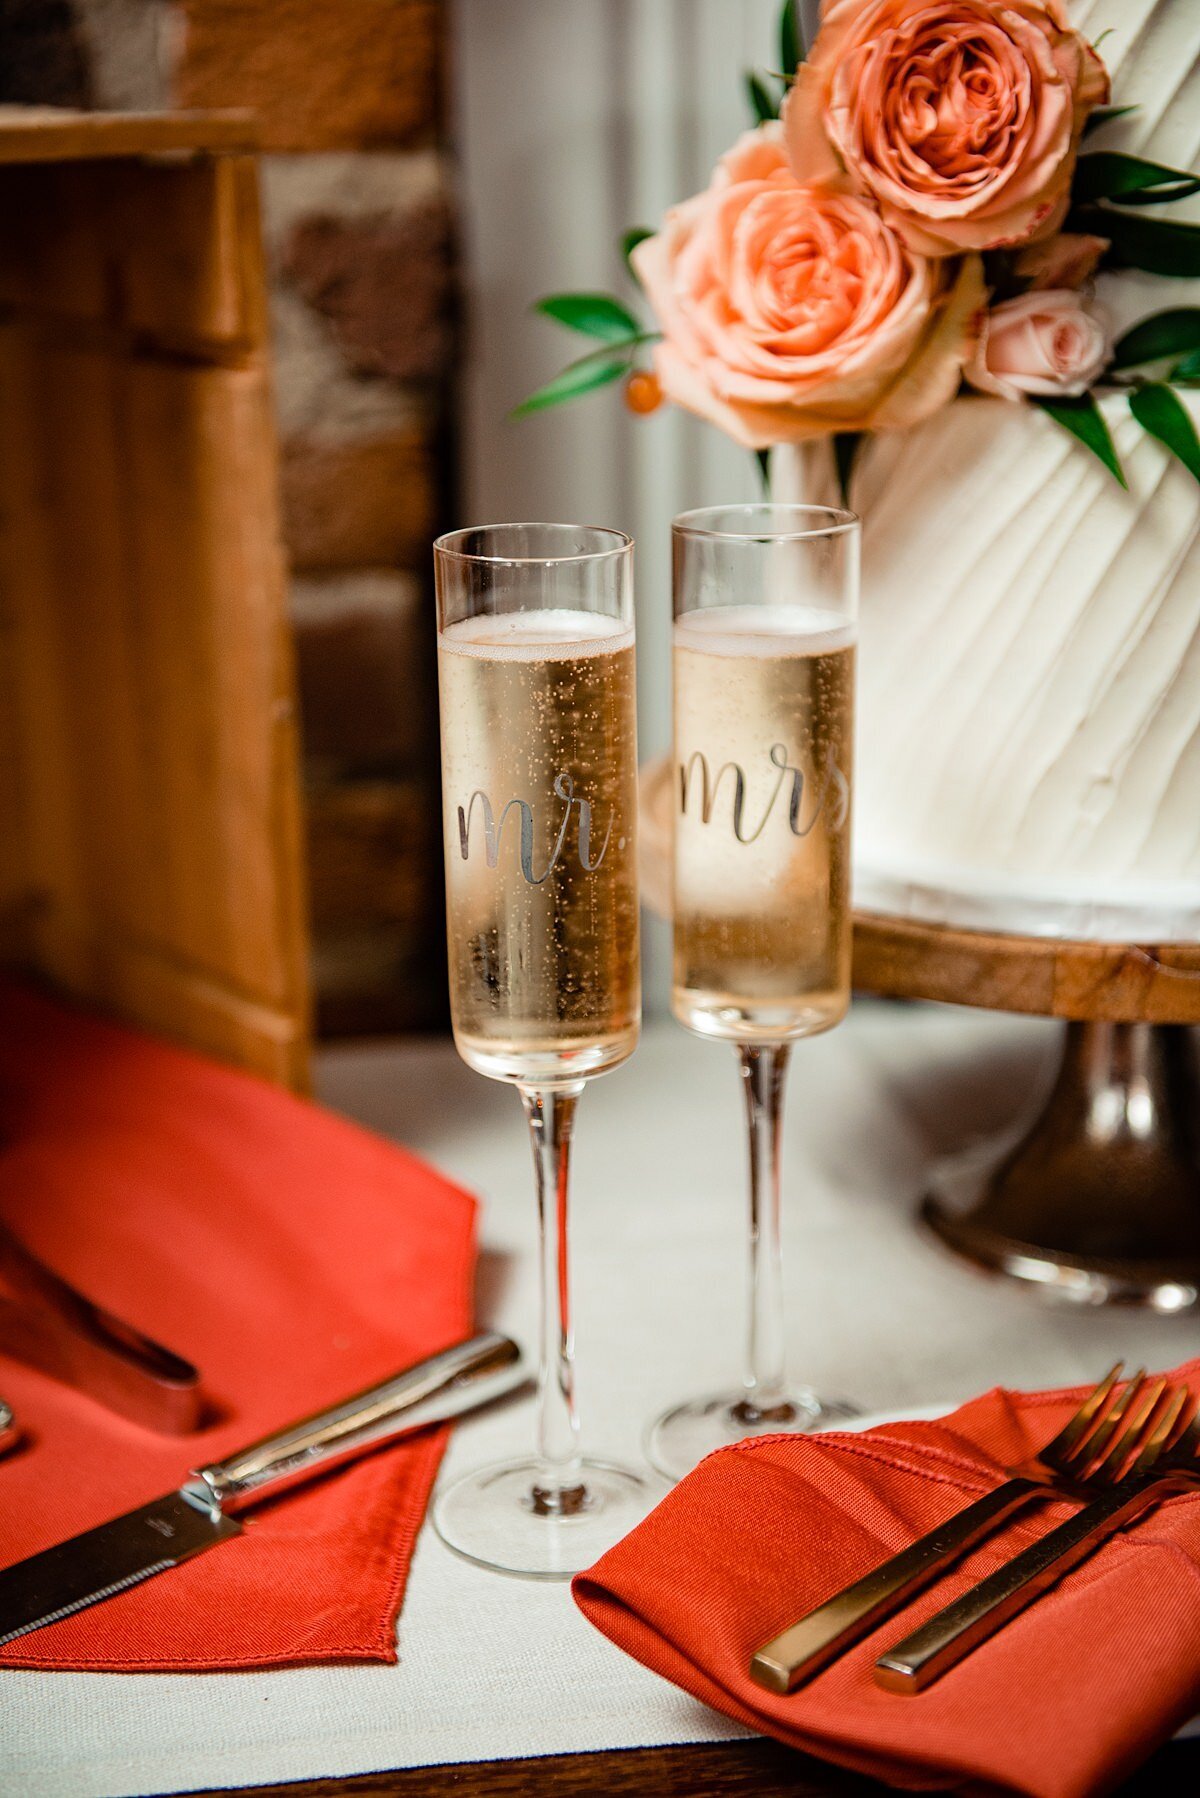 Mr. and Mrs. champagne flutes filled with champagne sit between two burnt orange napkins with gold flatware. Behind the glasses is the two tier white wedding cake with striped frosting and blush roses.